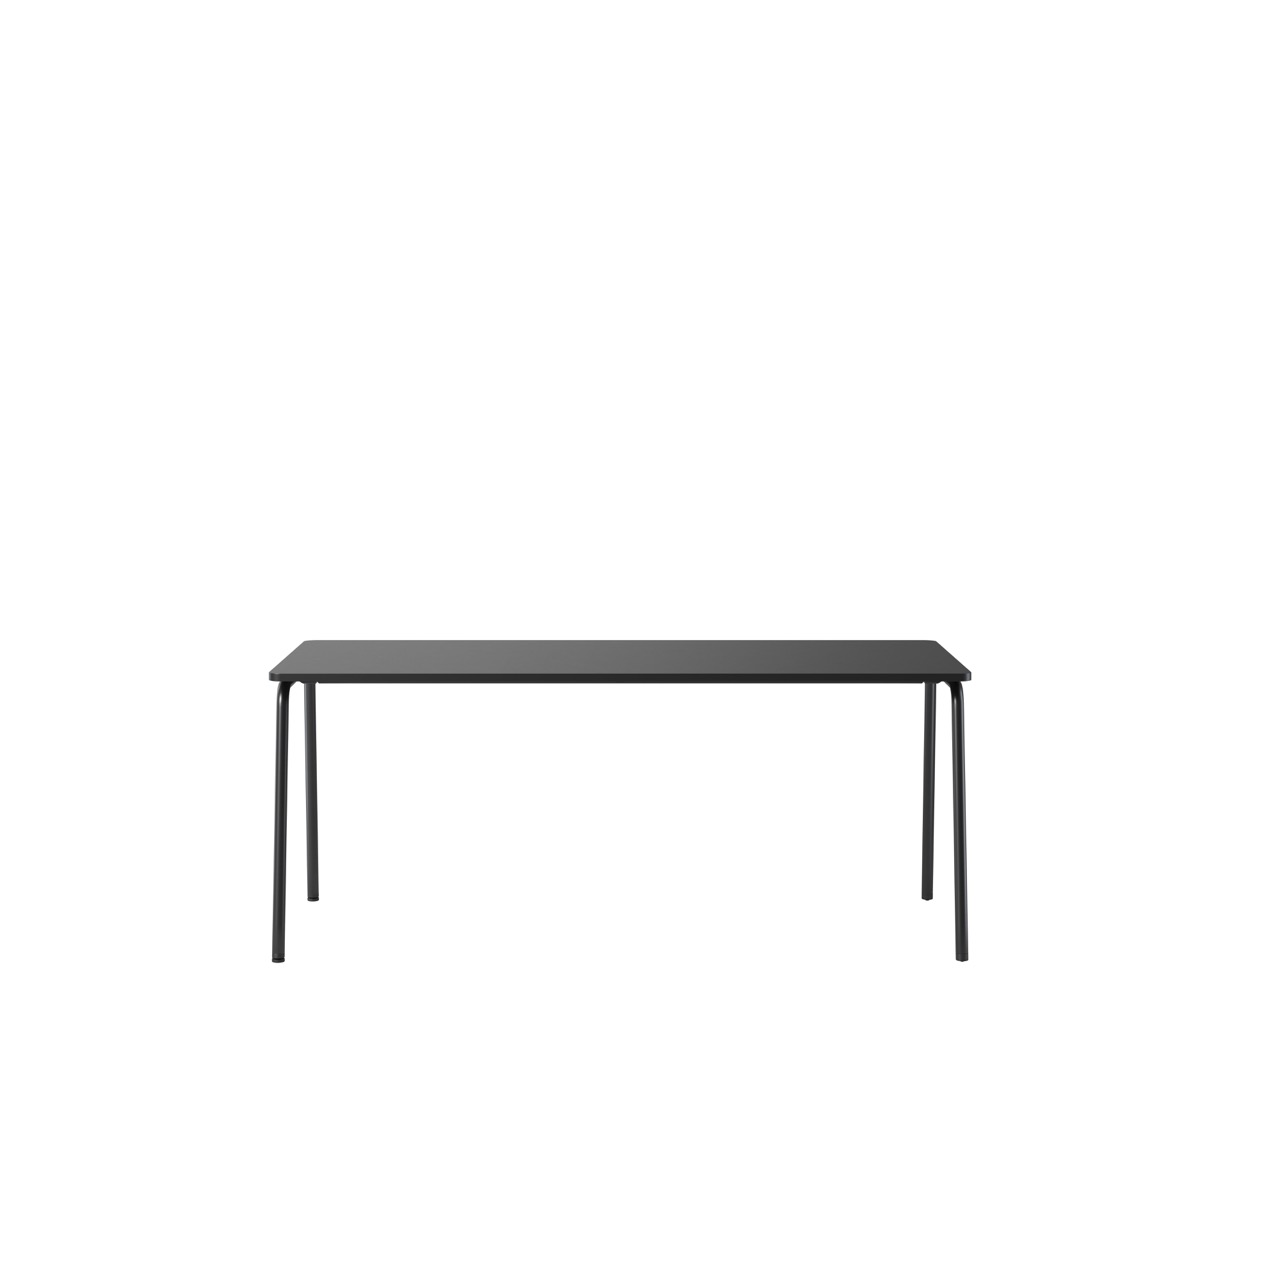 OCEE&FOUR - Tables - FourReal 74 - 180 x 80 - Angled - Packshot Image 2 Large